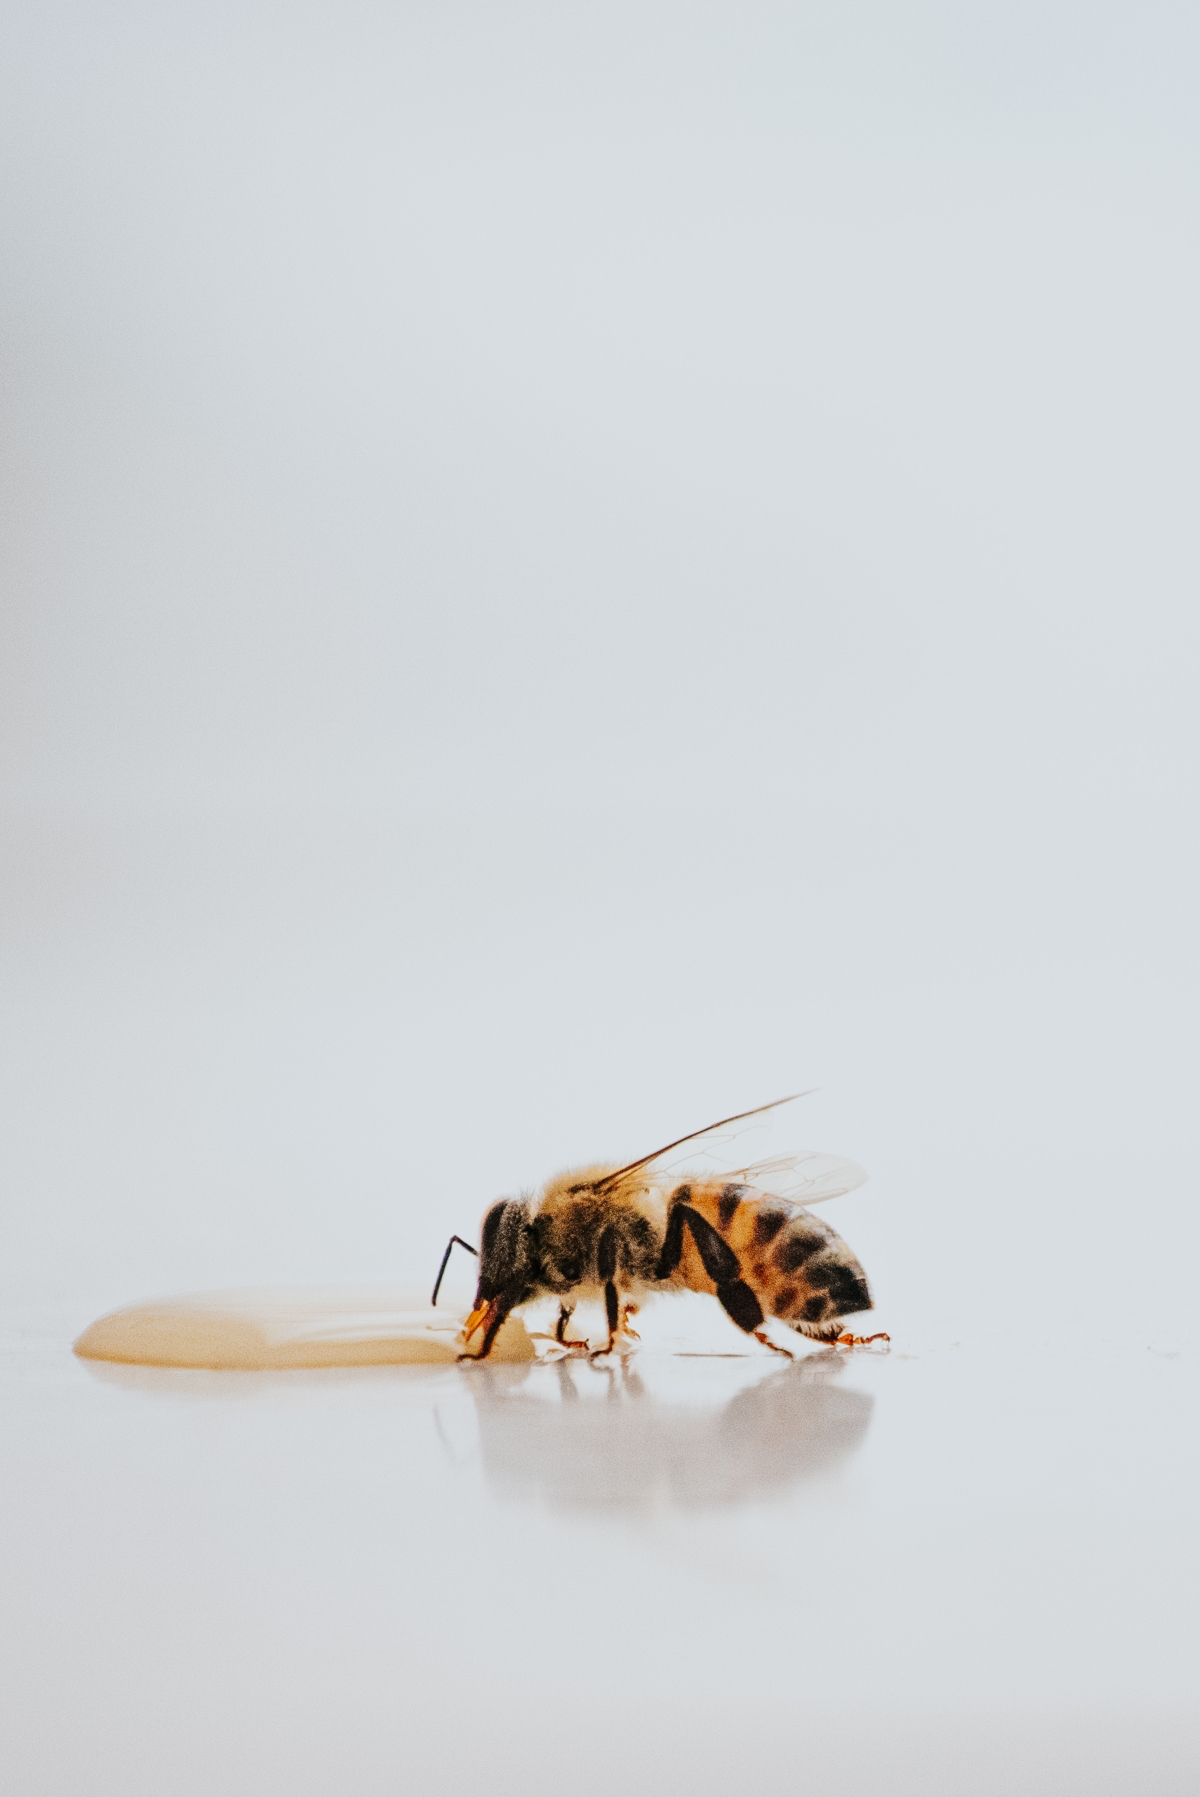 how to treat bee wasp sting